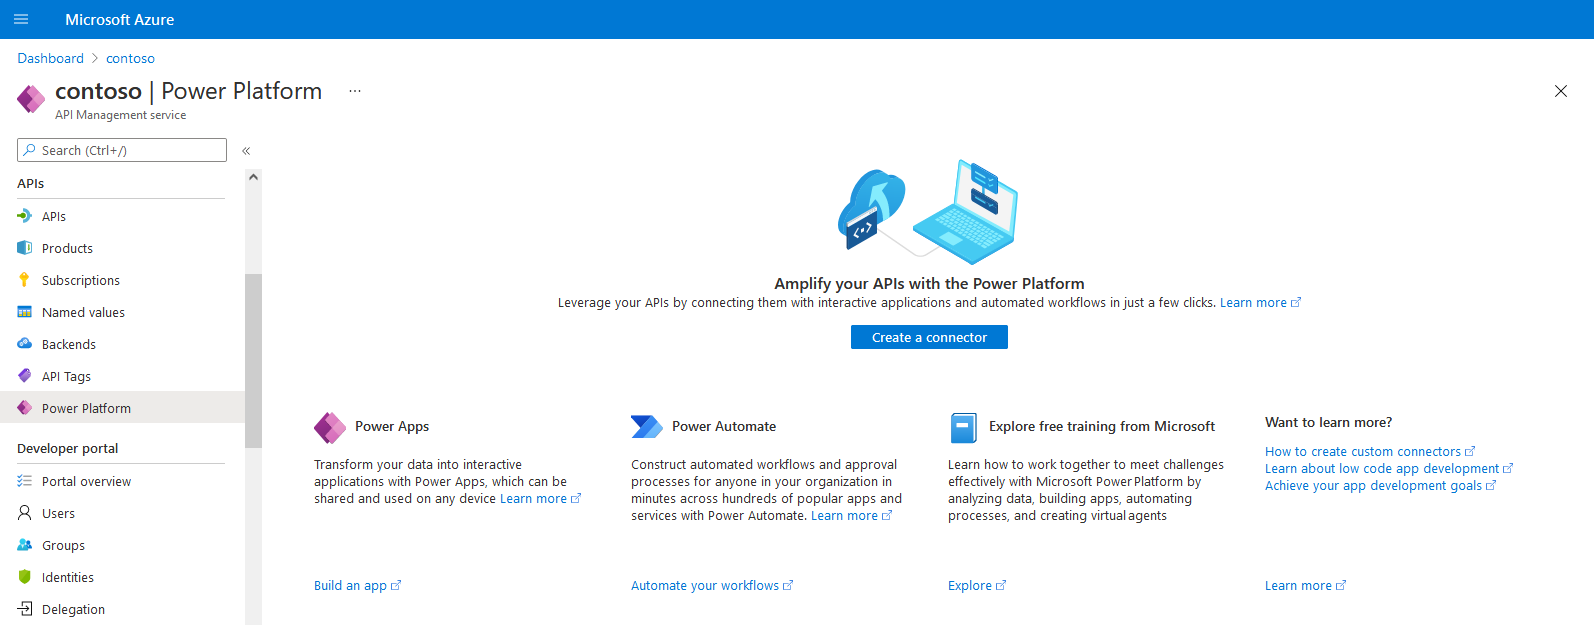 Power Platform page in the Azure portal